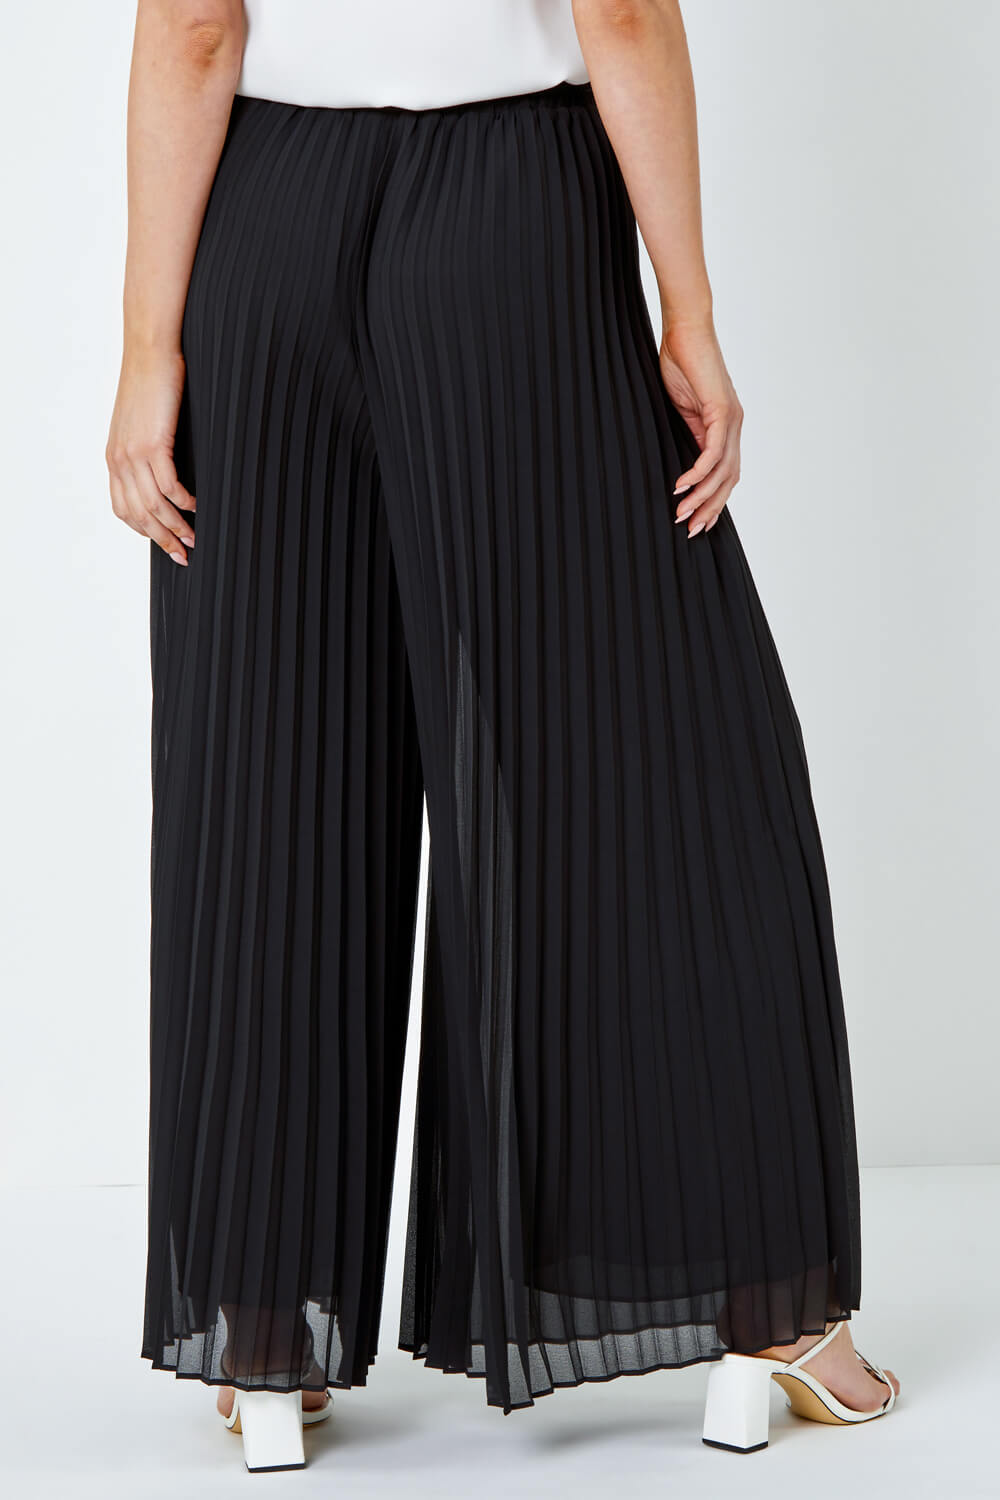 Black Pleated Wide Leg Trousers, Image 4 of 5